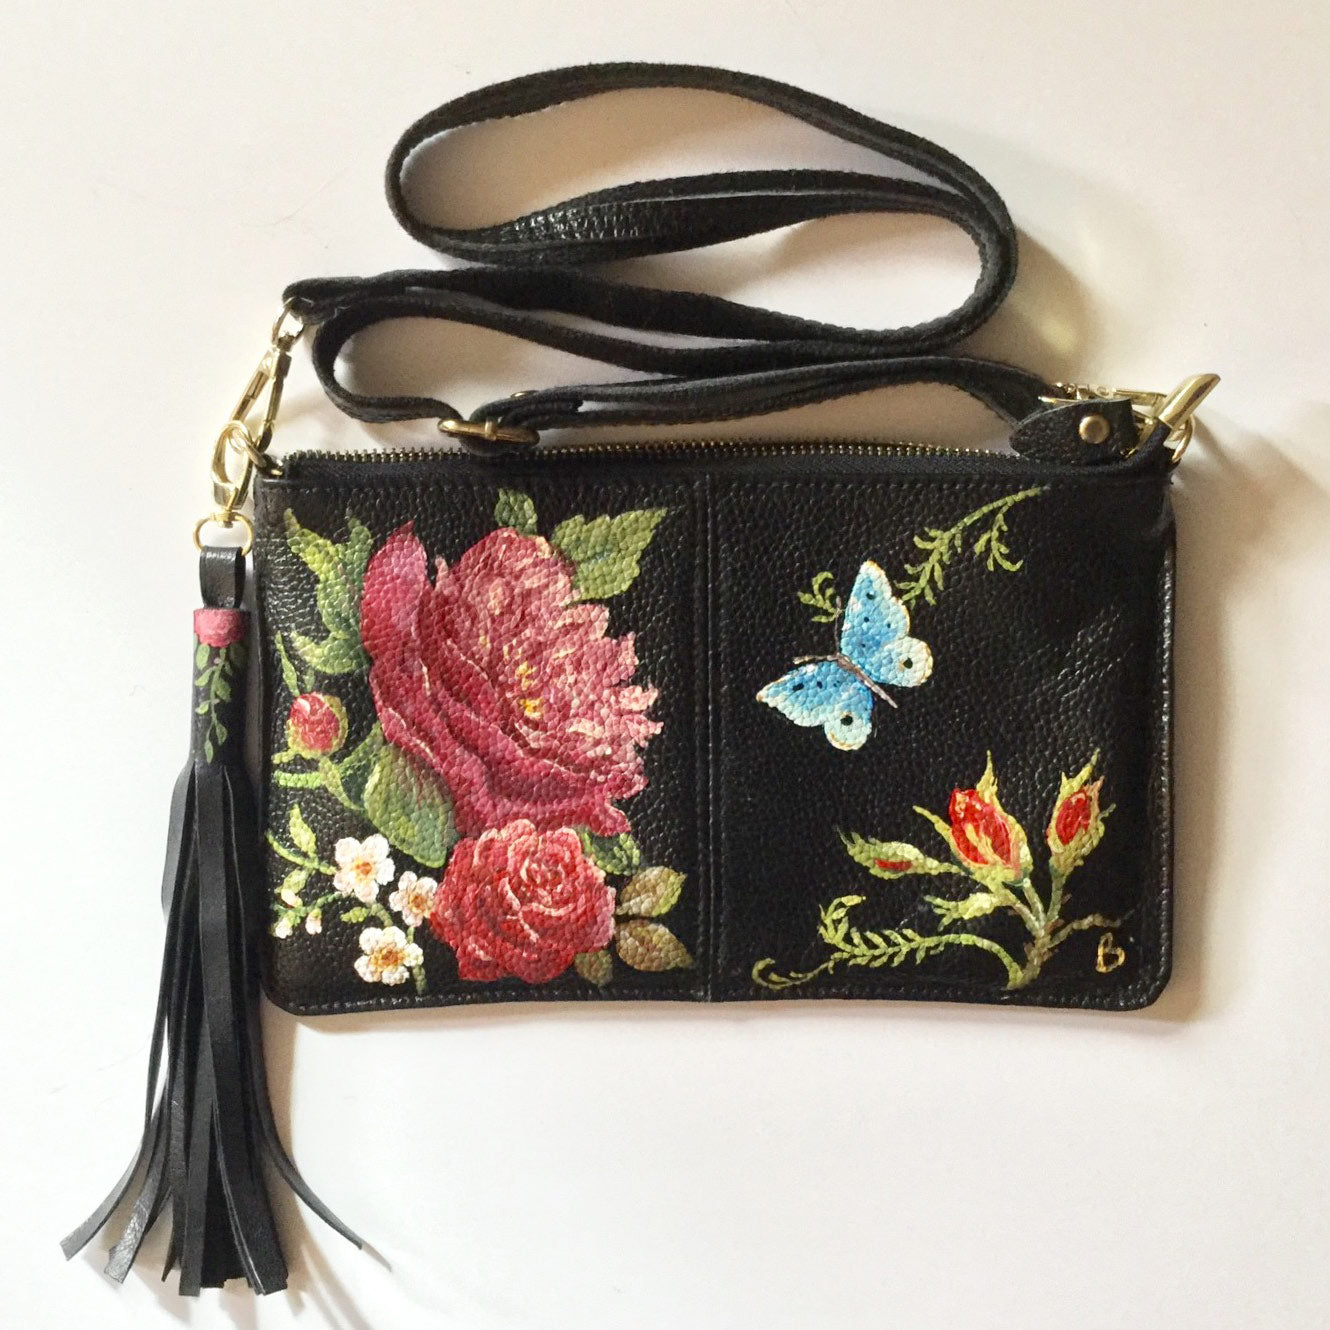 Personalised Cross Body Bags for Women Hand Painted Designer